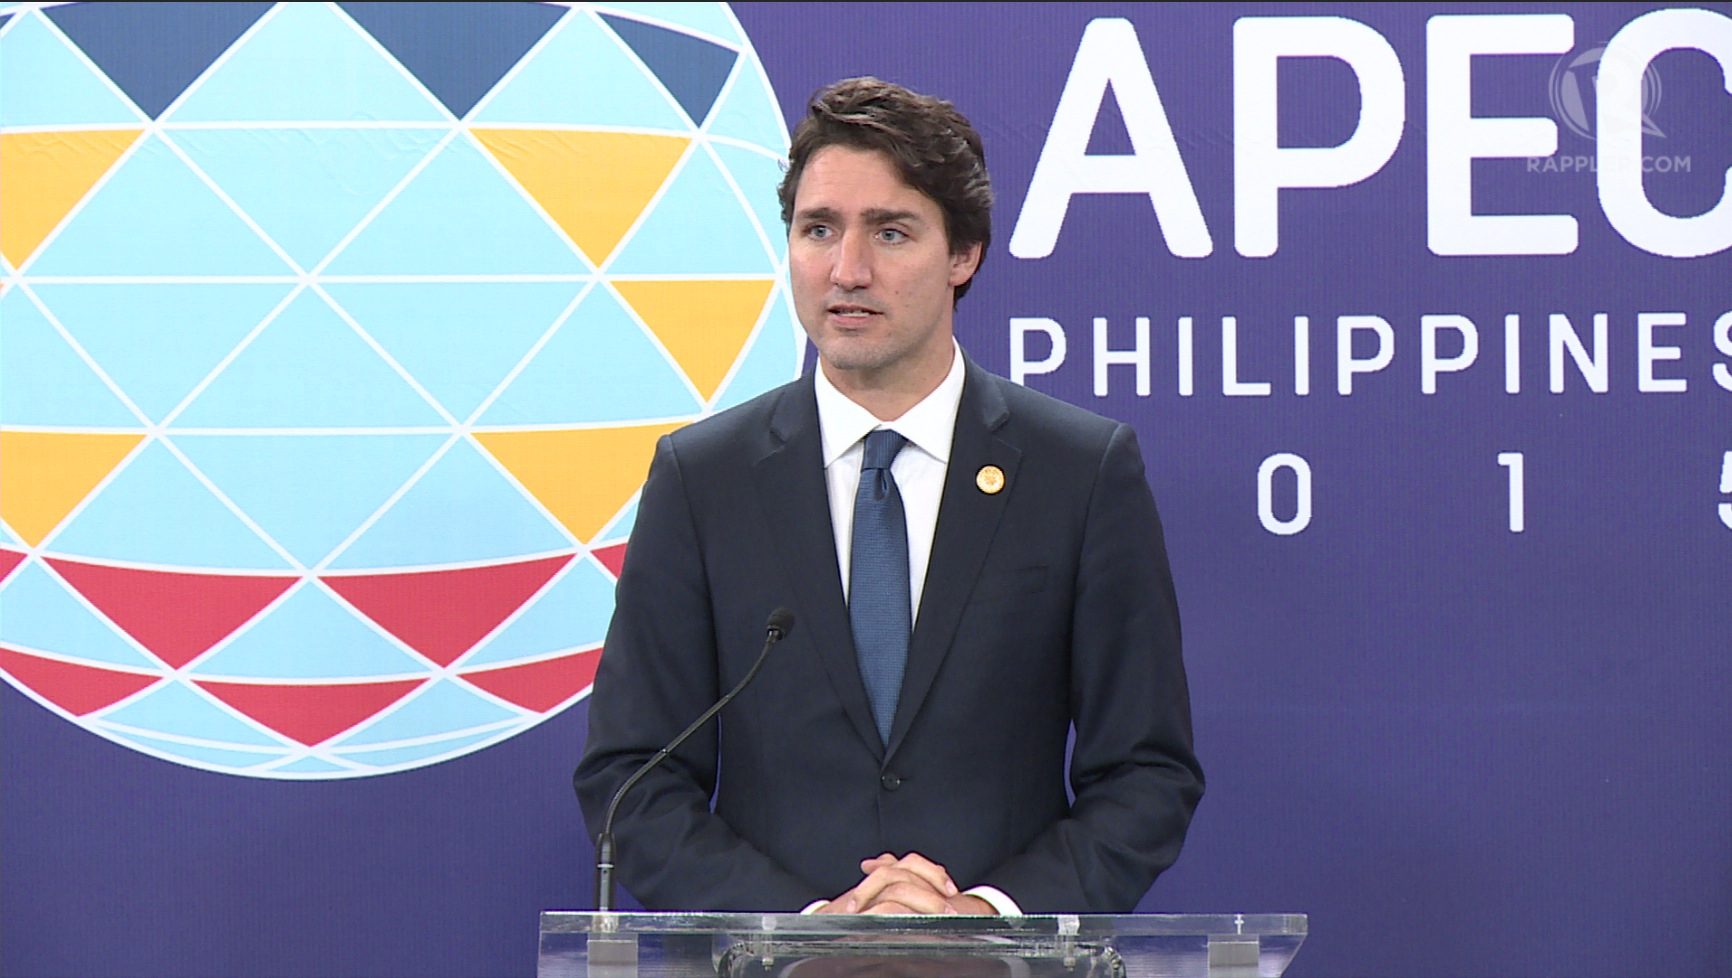 Canada PM Trudeau on trash: We’re working on laws for future